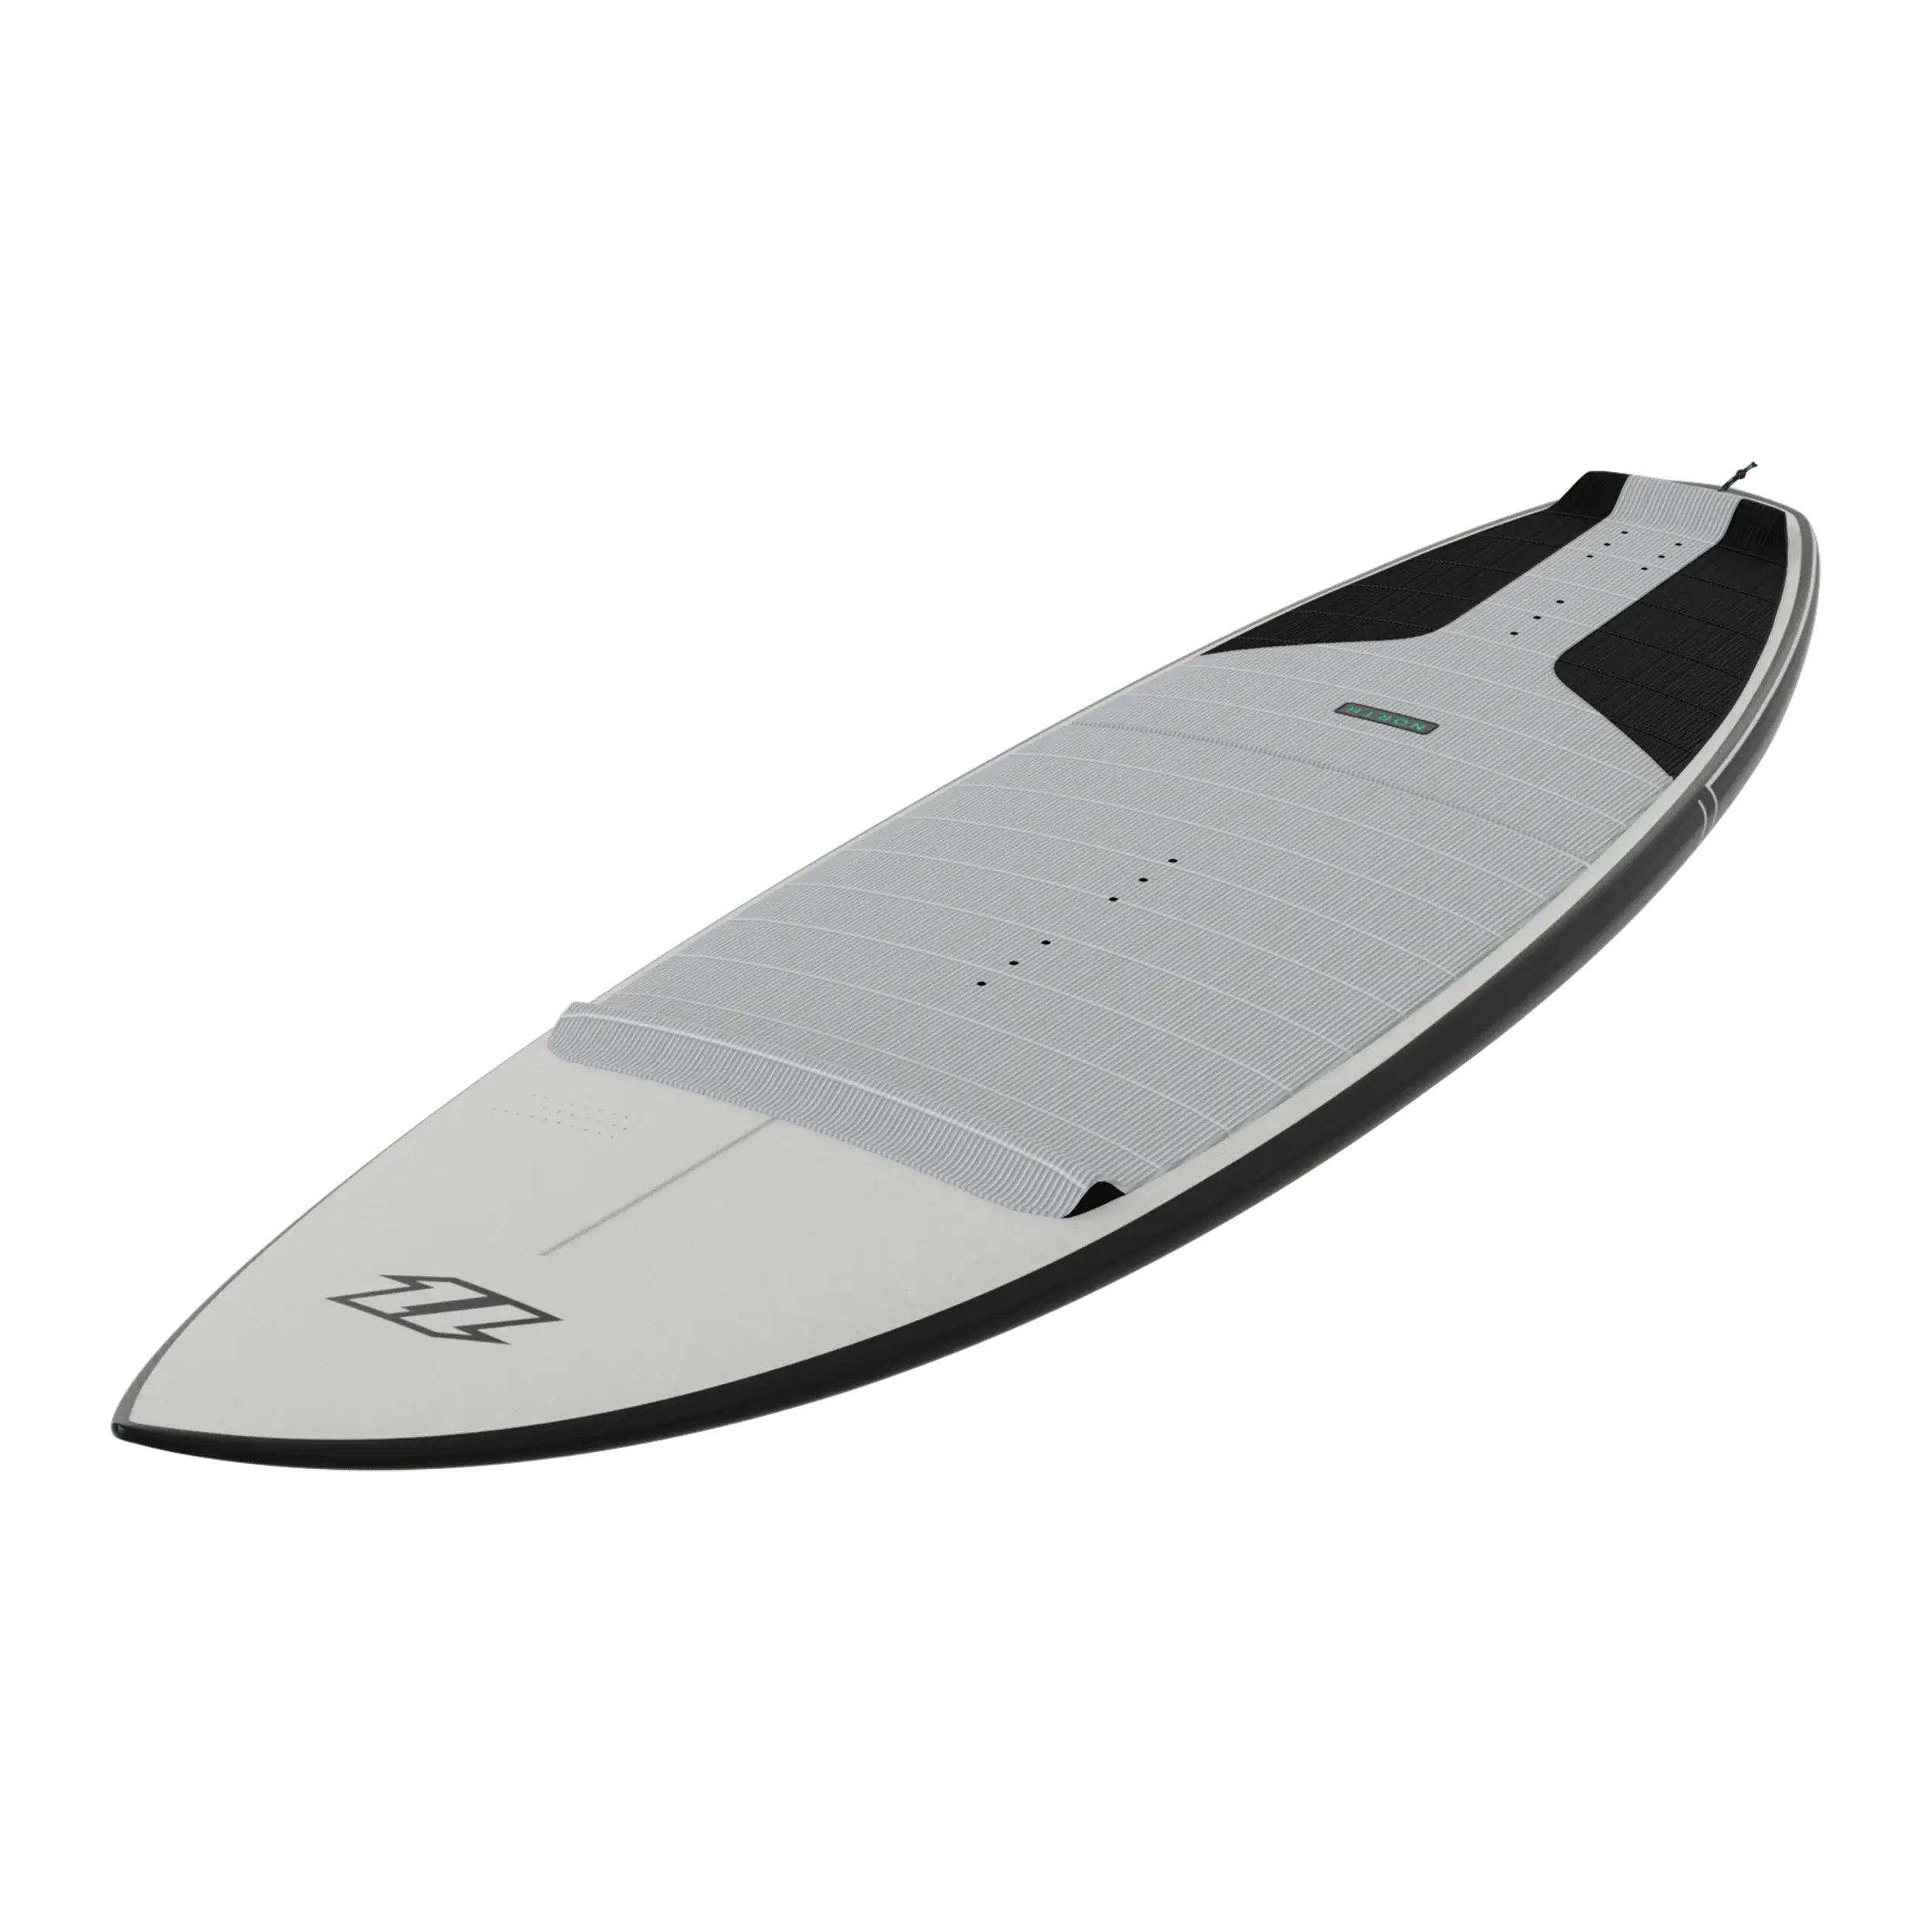 2023 North Charge Surf Board